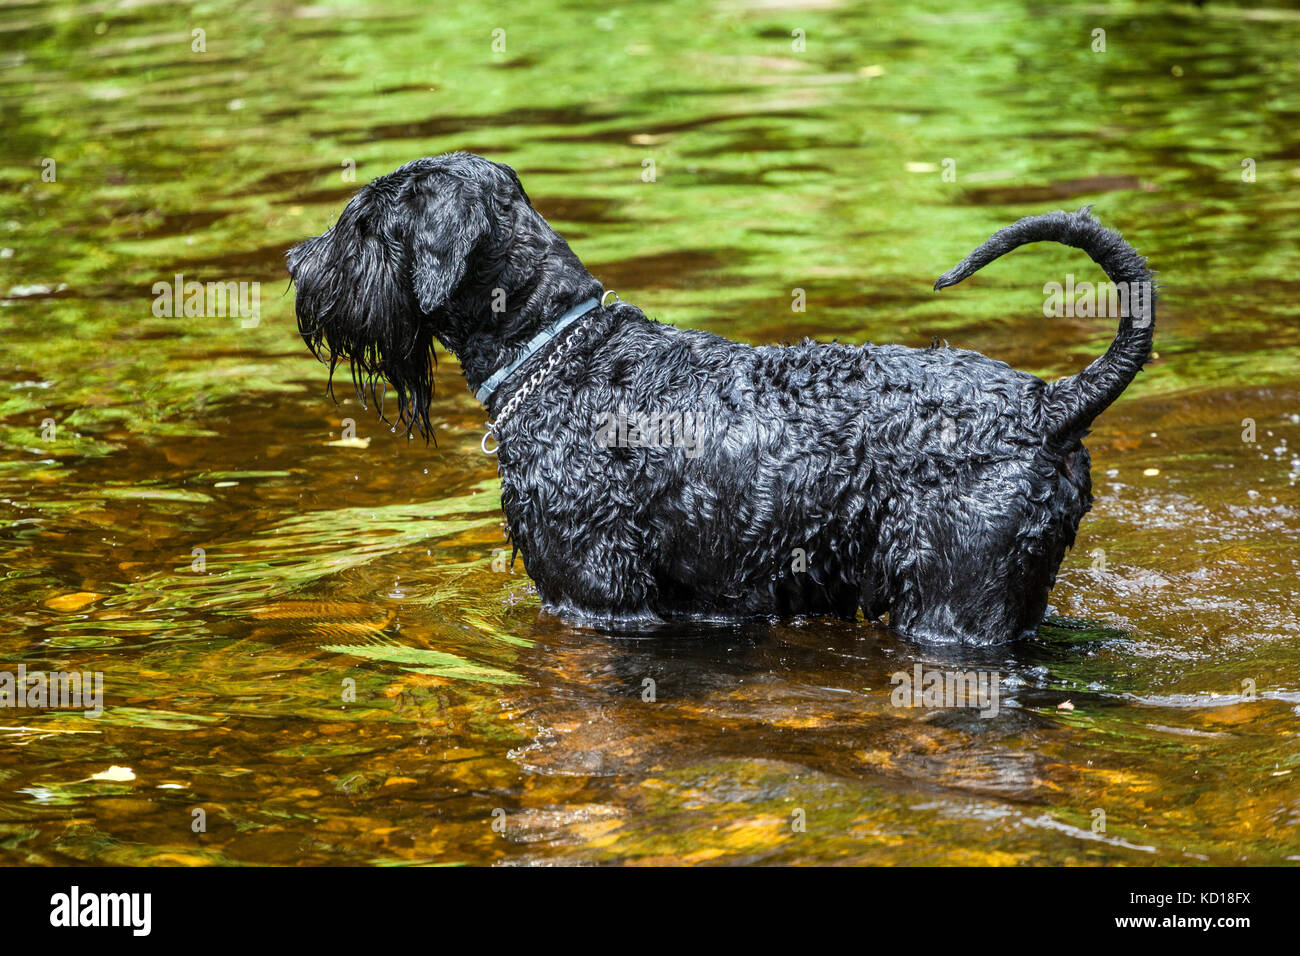 Big wet black schnauzer dog, standing in the river, Dog in water Stock Photo